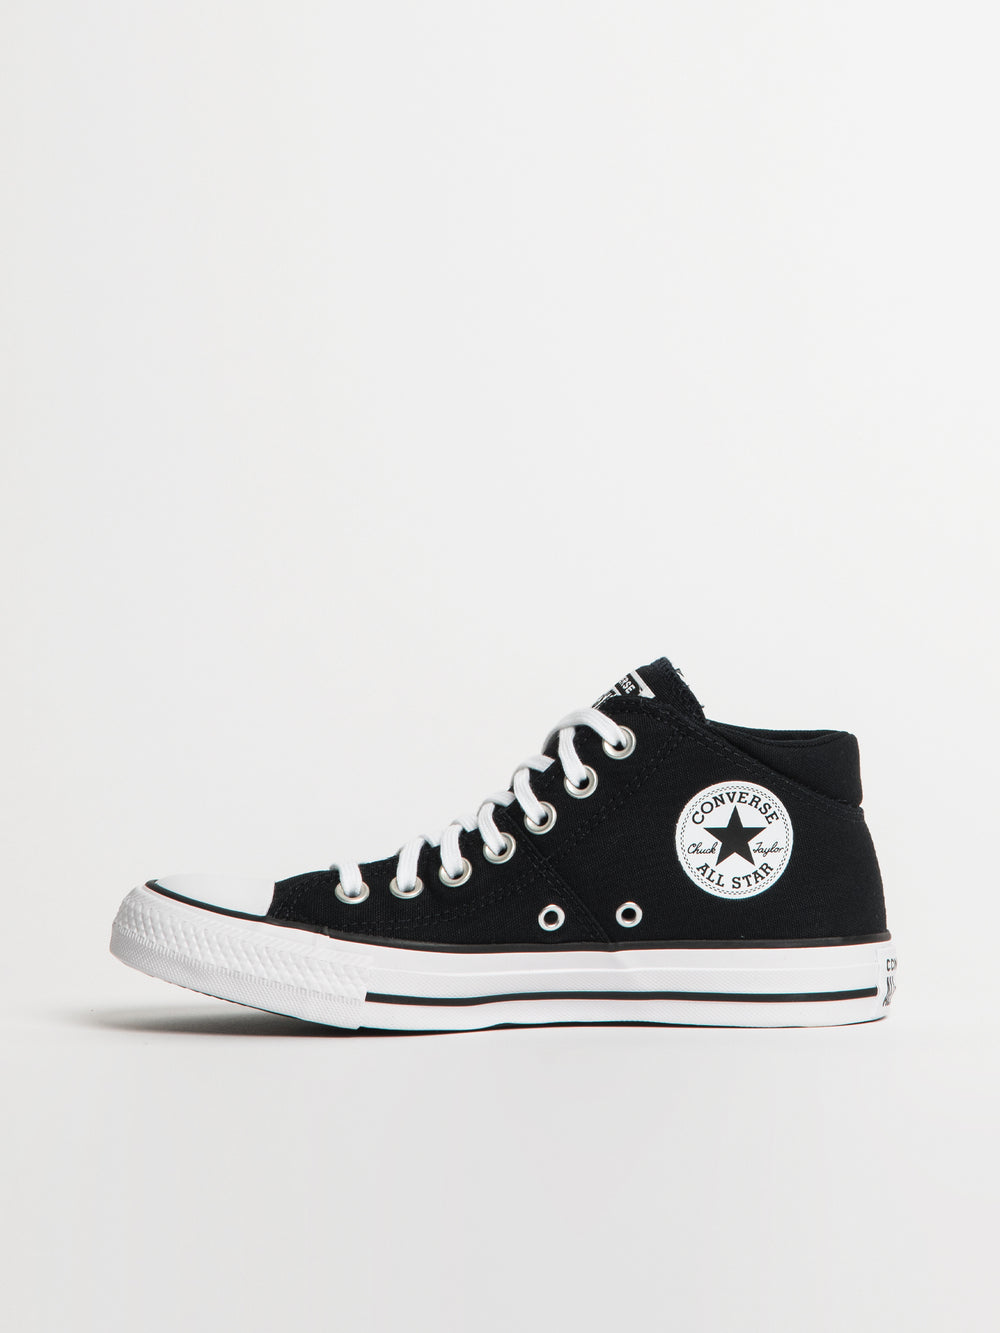 WOMENS CONVERSE CHUCK TAYLOR ALL-STAR MADISON MID